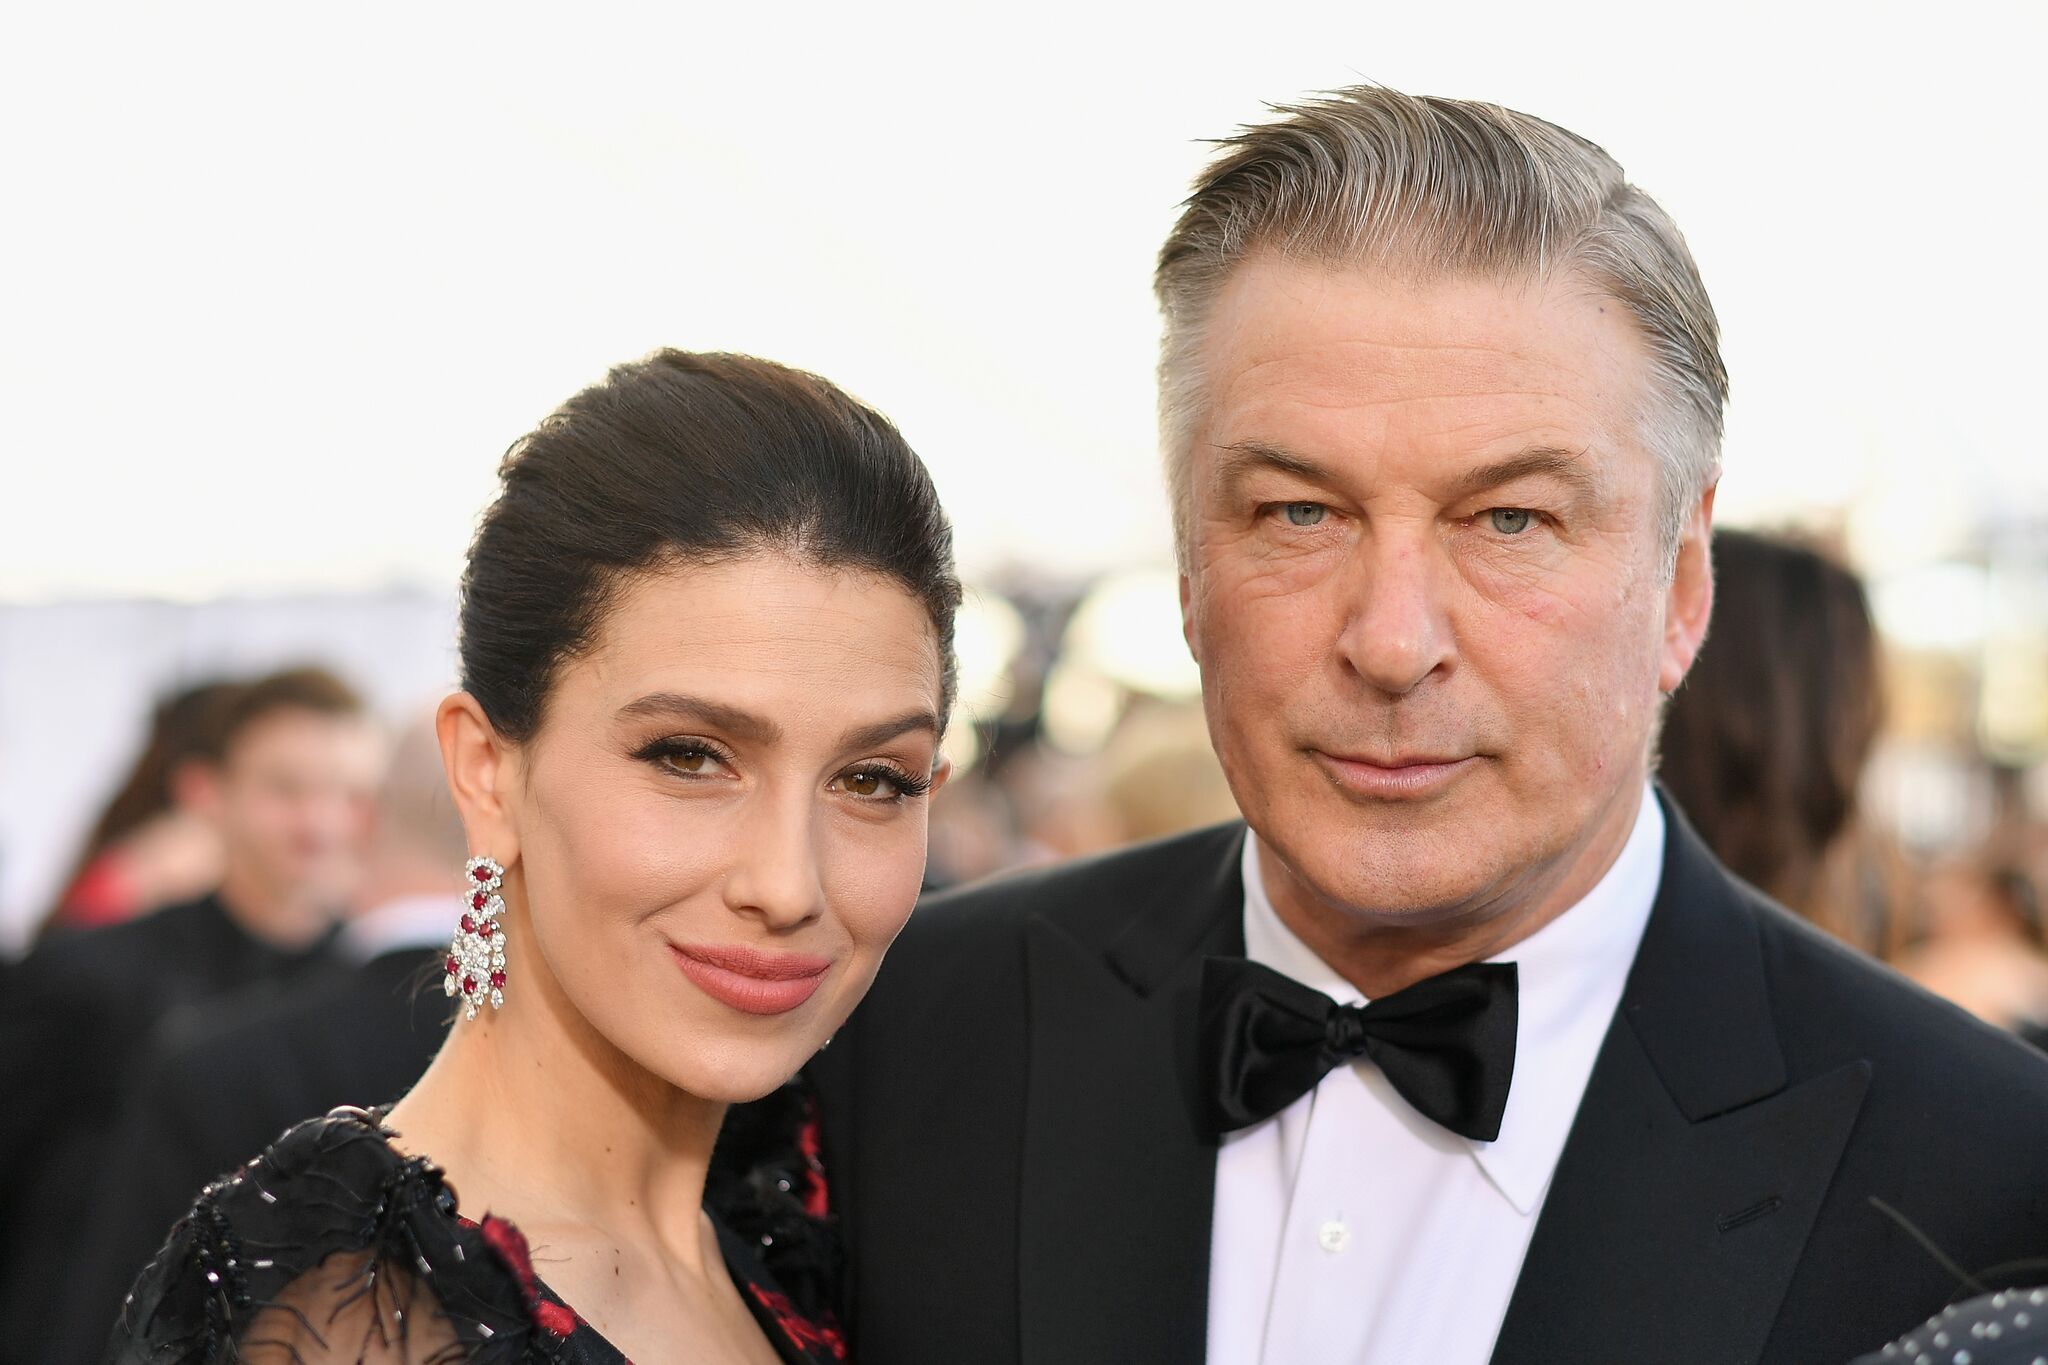  Hilaria Baldwin and Alec Baldwin attend the 25th Annual Screen Actors Guild Awards at The Shrine Auditorium on January 27, 2019 in Los Angeles, California | Photo: Getty Images